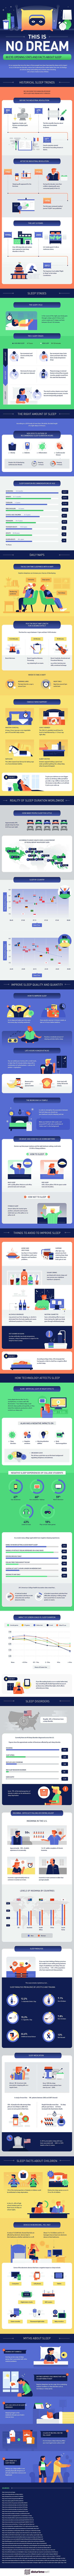 80 Eye-Opening Stats & Facts About Sleep